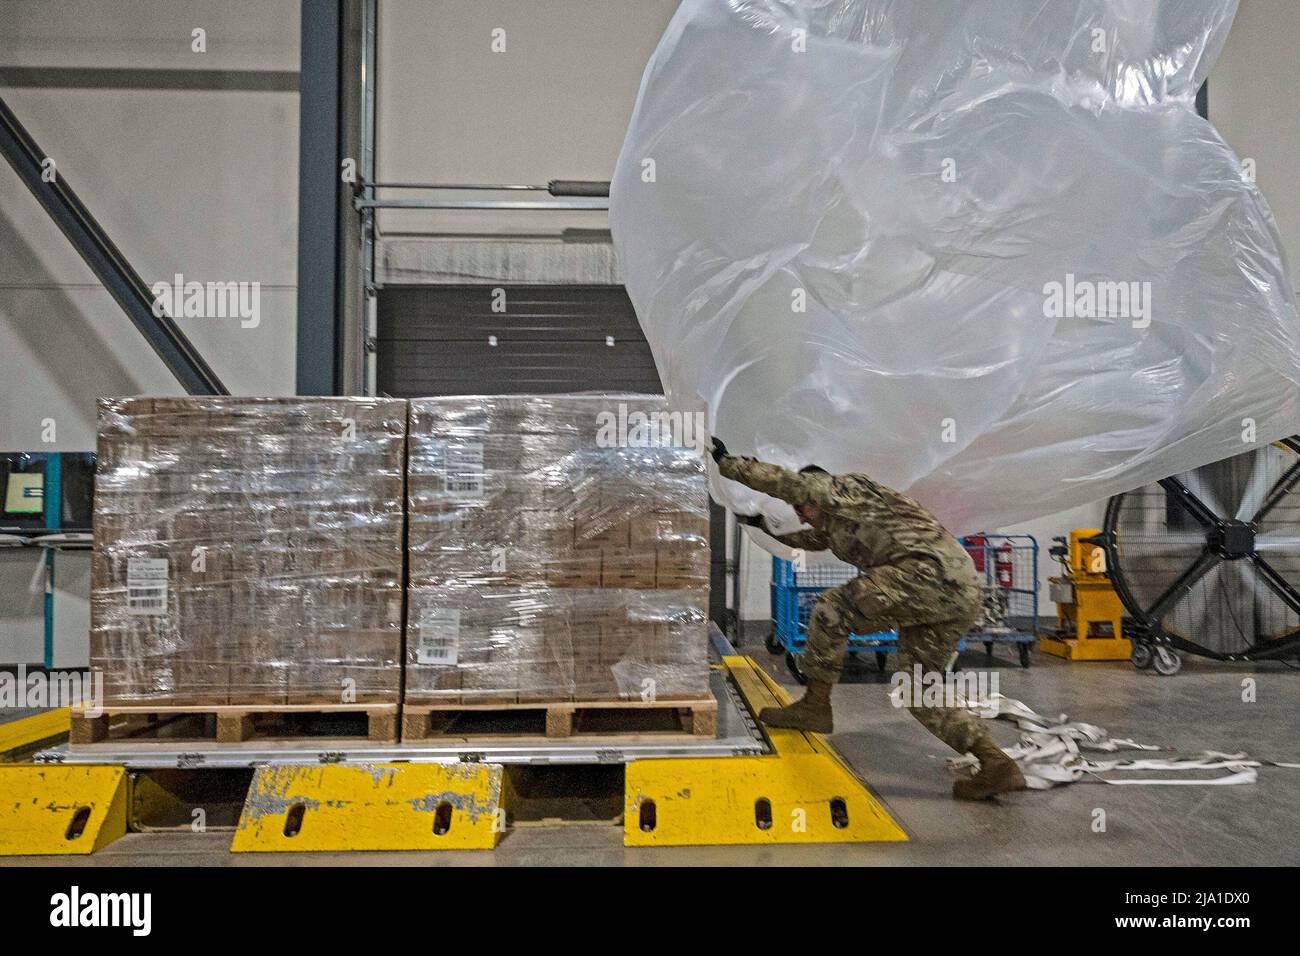 May 23, 2022 - Ramstein Air Base, Germany - U.S. Air Force Airman 1st Class Sukvinder Riar-Sotelo, 72st Aerial Port Squadron cargo processing specialist, throws a plastic bag over a pallet of infant formula at Ramstein Air Base. Riar-Sotelo and others helped process, package and load 132 pallets of medical grade infant formula onto a U.S. Air Force C-17 Globemaster III aircraft for rapid transport to the United States for further distribution. A second shipment of formula began arriving May 23 at Ramstein Air Base for processing and loading onto a commercial contracted carrier destined for the Stock Photo